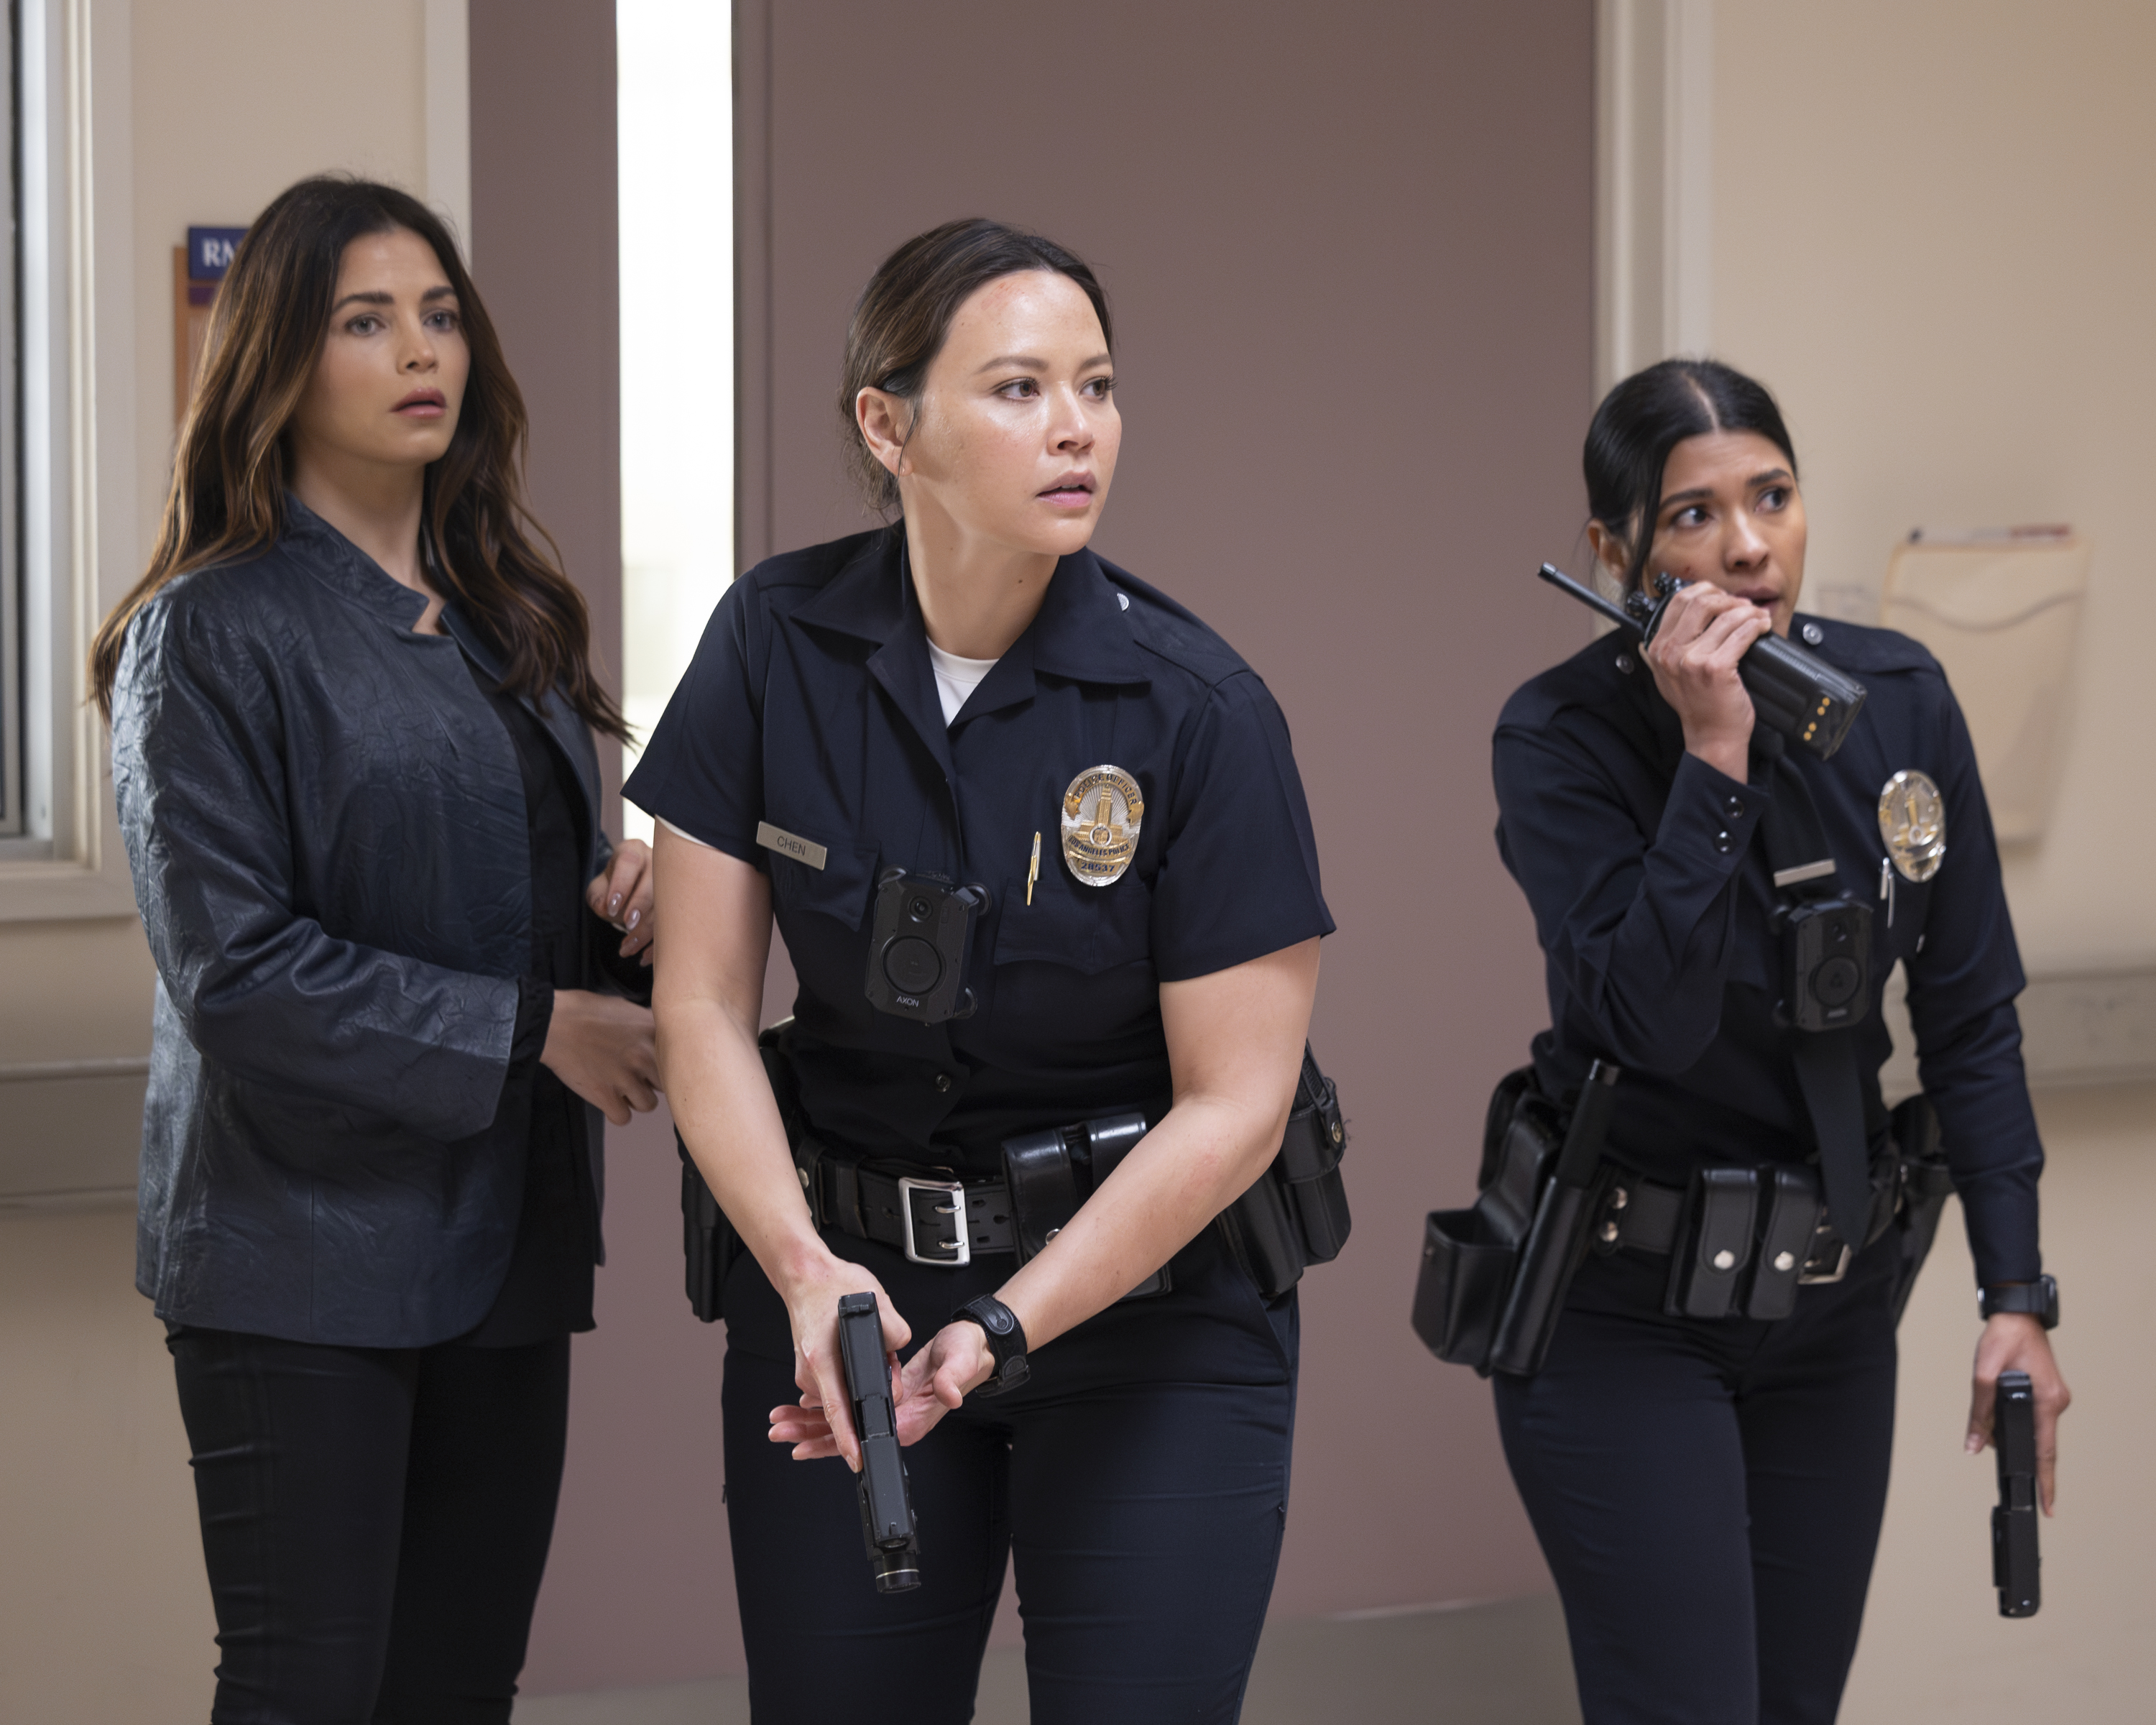 The rookie 6x08